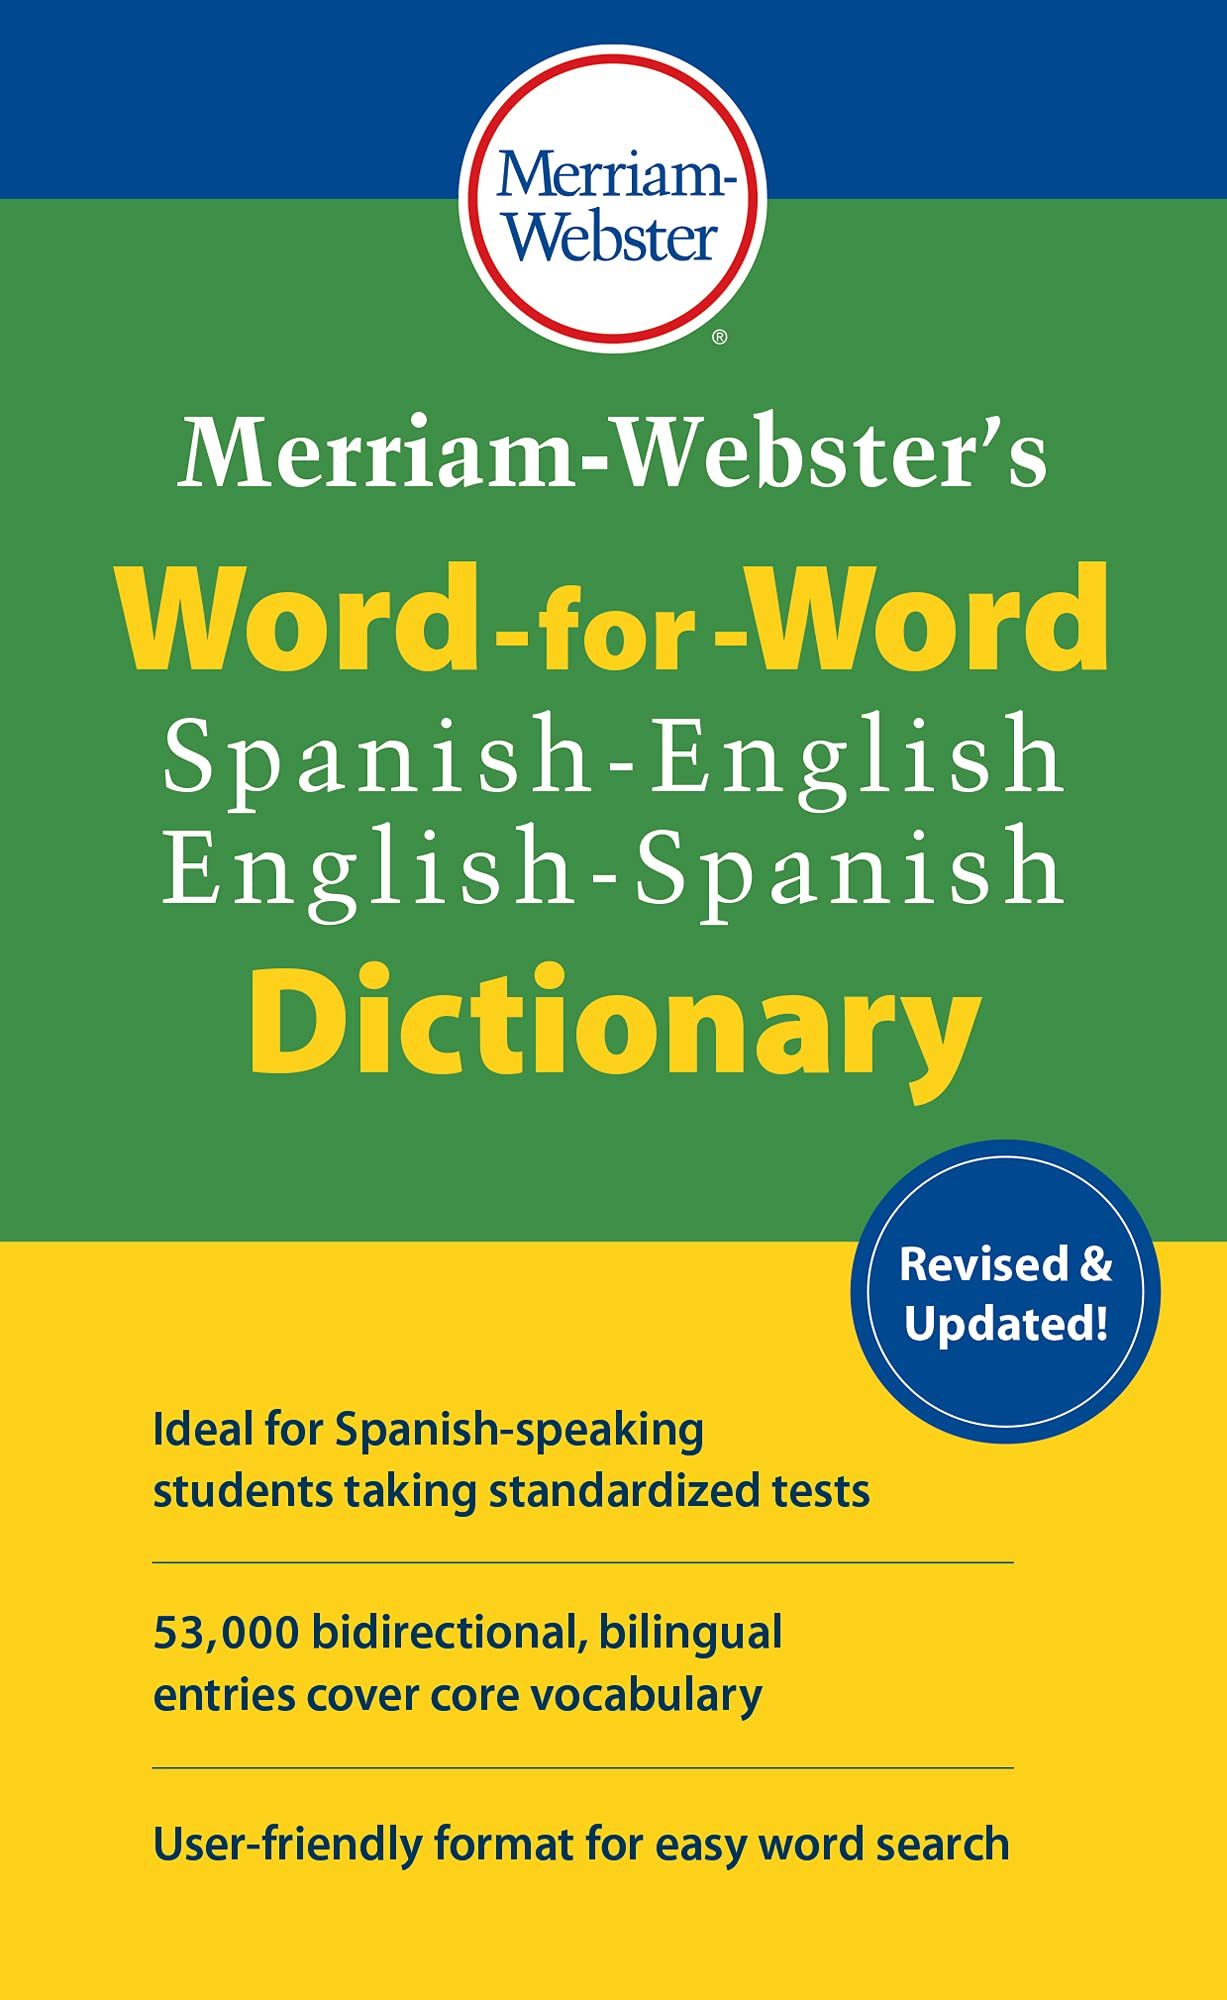 $5.49: Merriam-Webster's Word-for-Word Spanish-English Dictionary (Multilingual, English and Spanish Edition)